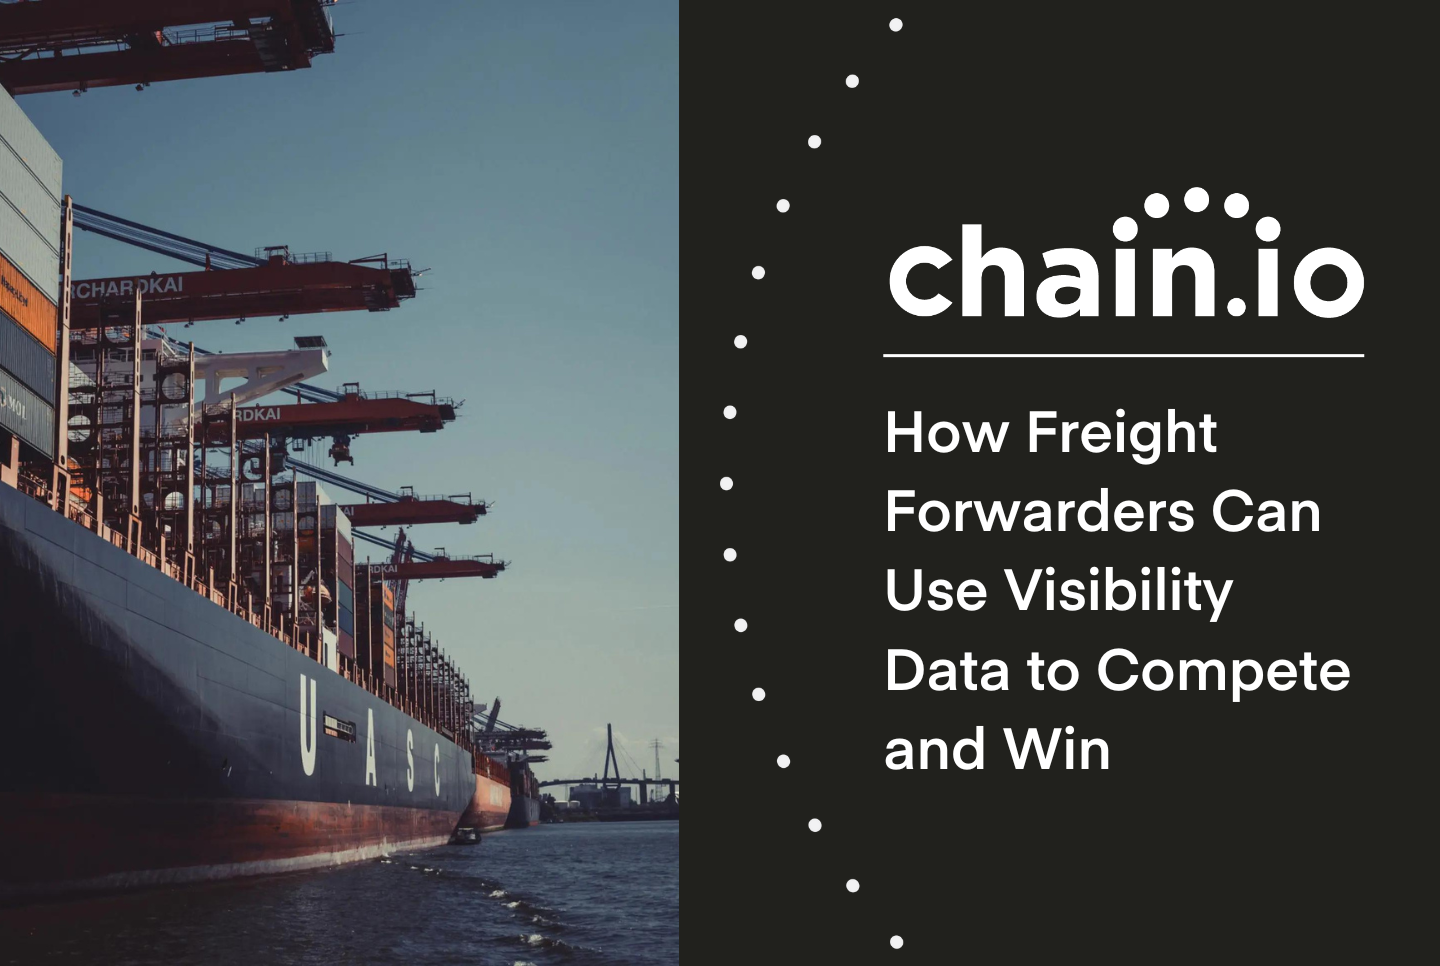 how freight forwarders can use third-party visibility data to compete and win.